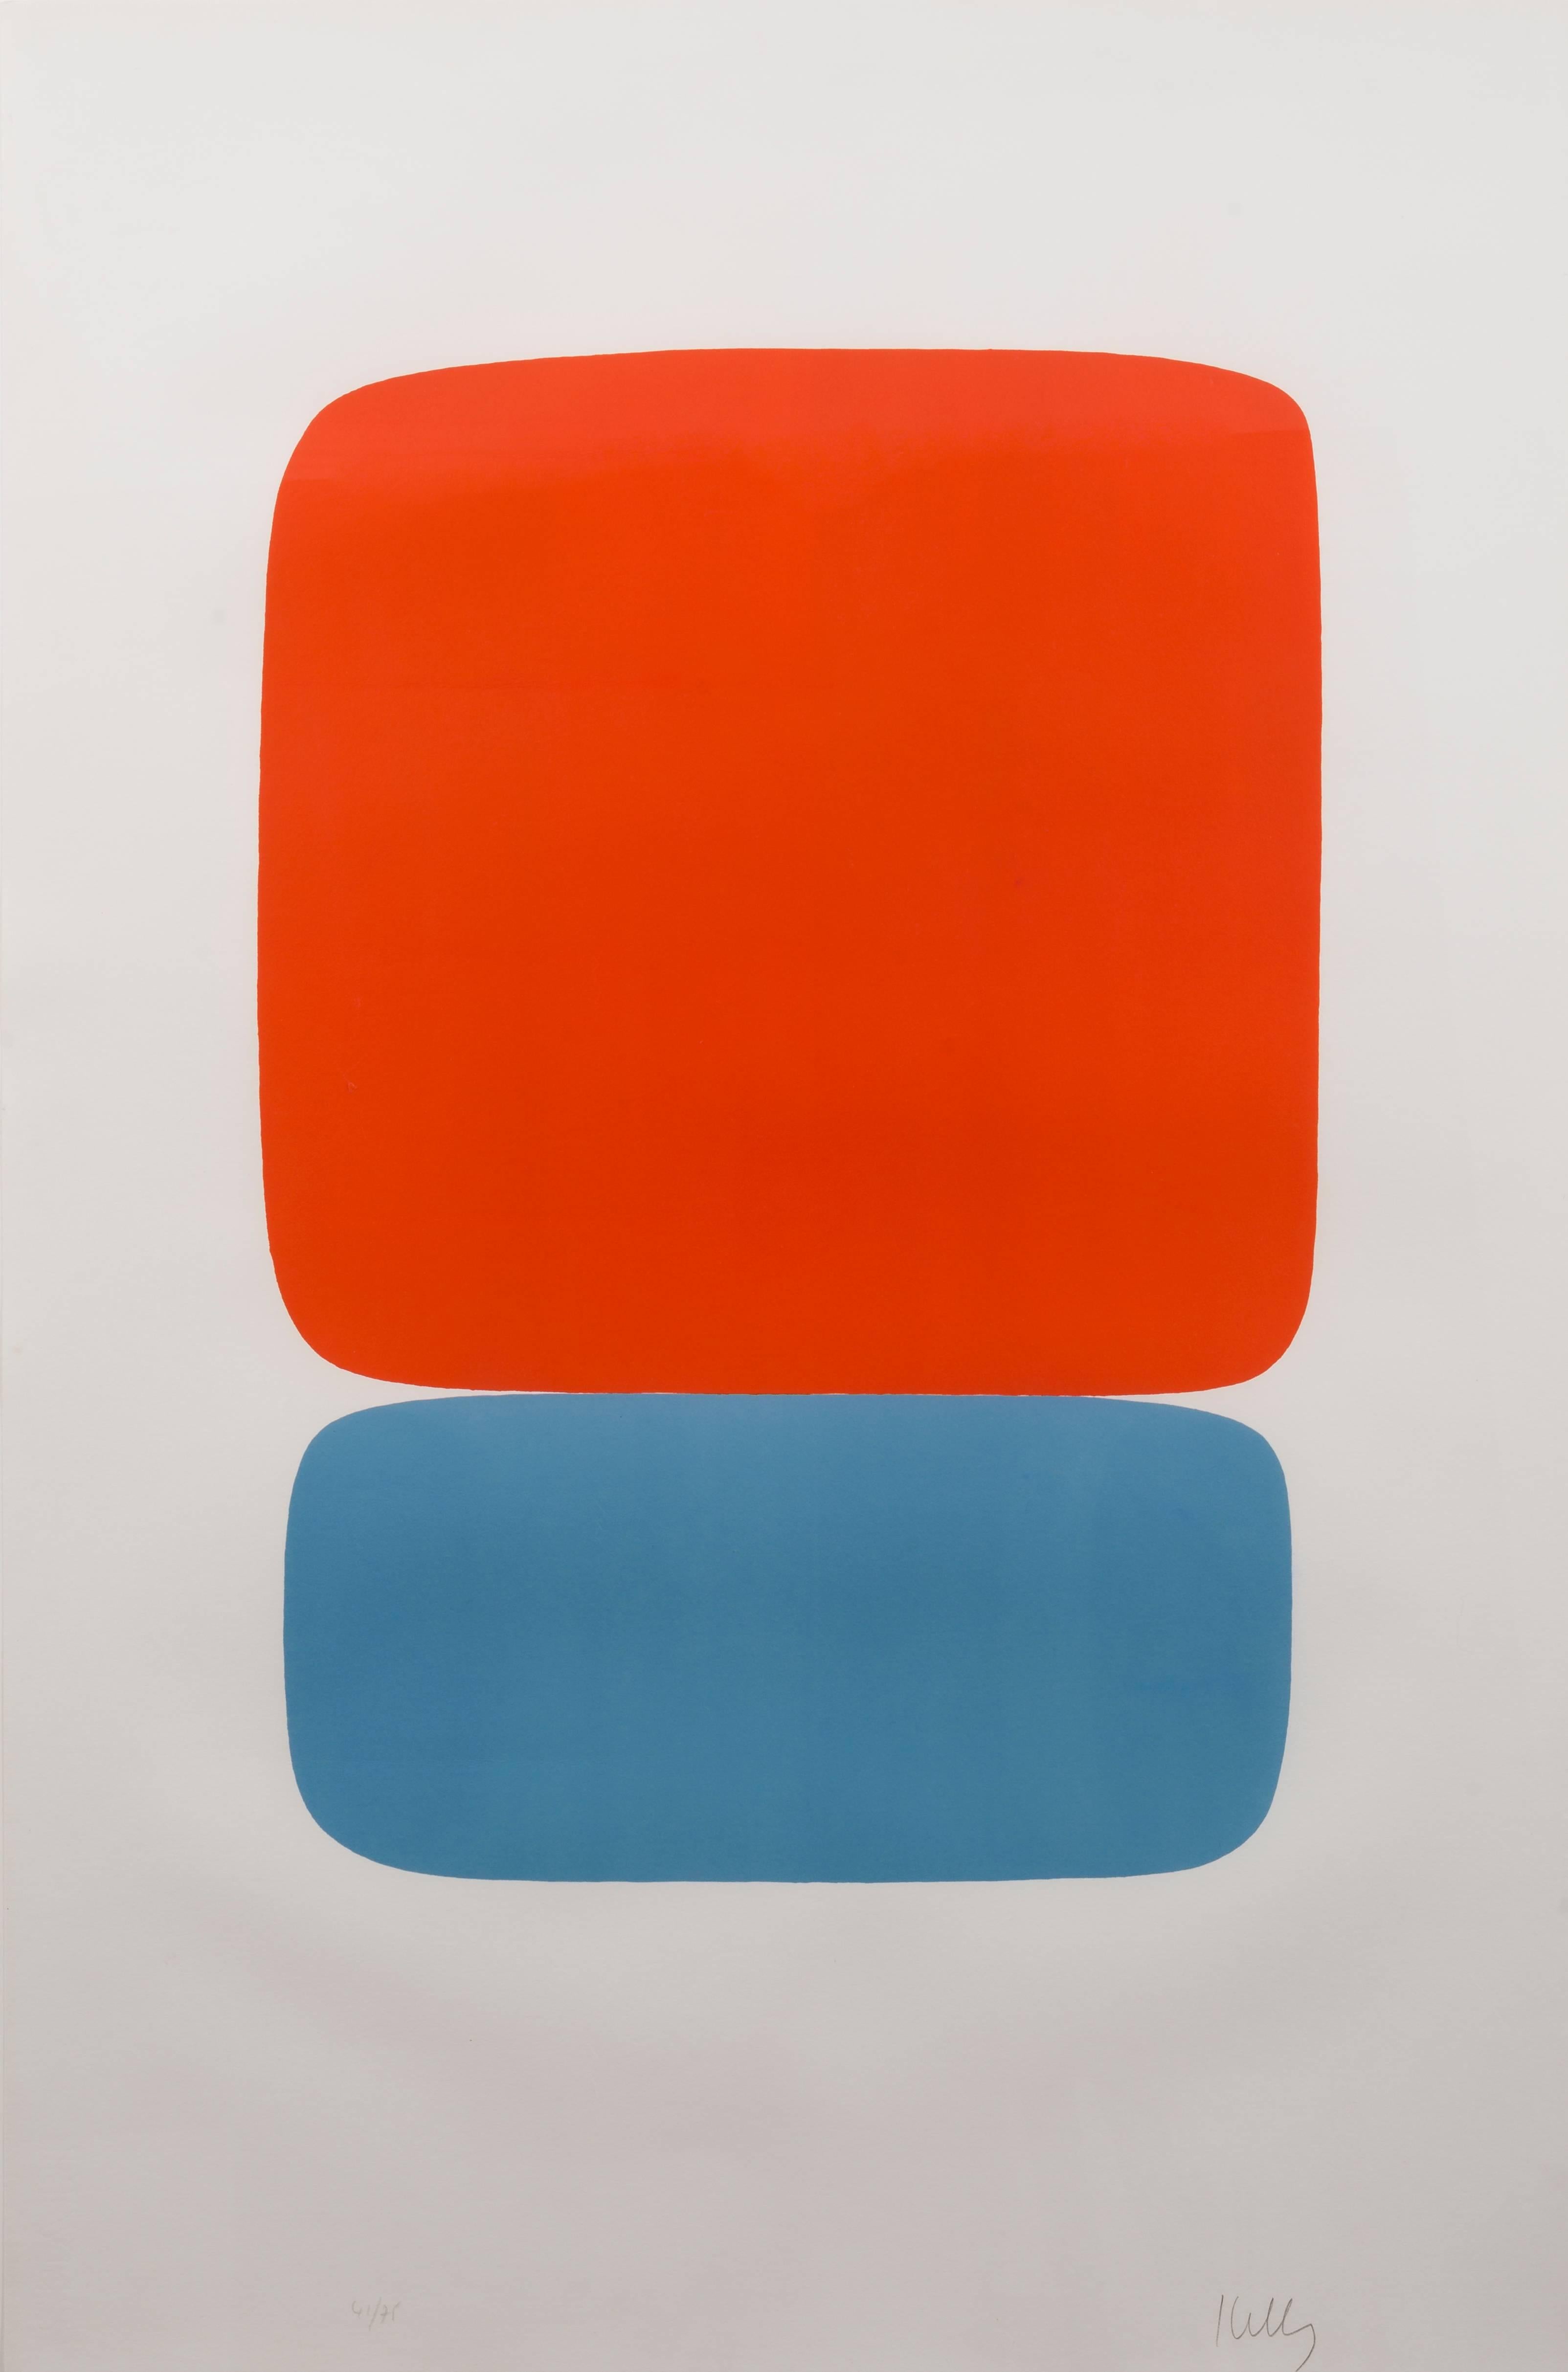 Ellsworth Kelly Abstract Print - Red-Orange over Blue